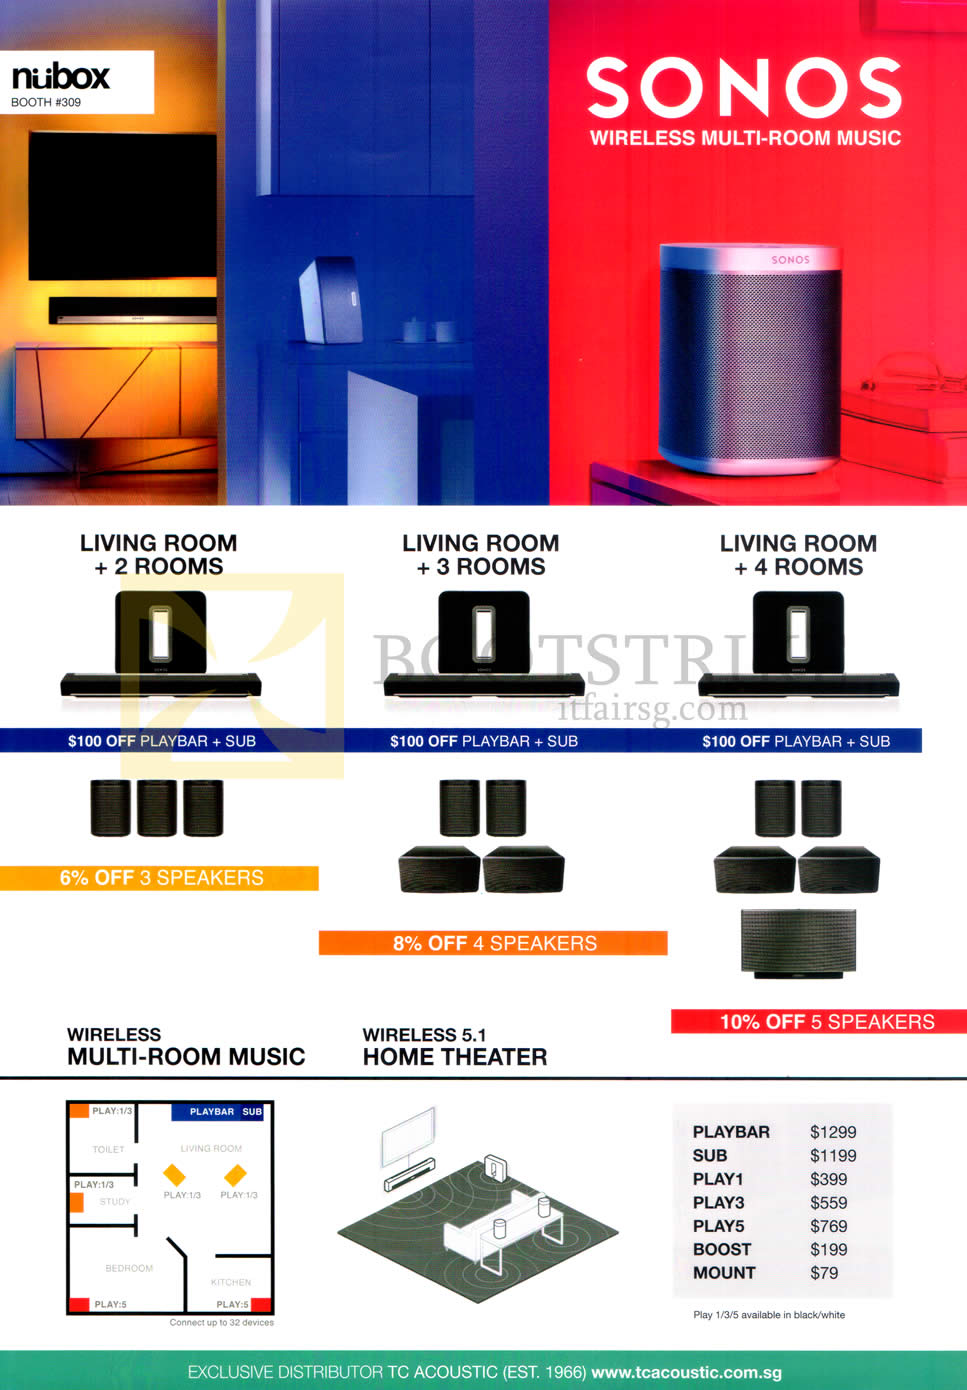 COMEX 2015 price list image brochure of Nubox Home Theatre Systems 3.1, Play 3, Wireless Multi-Room Music, Wireless 5.1 Home Theatre